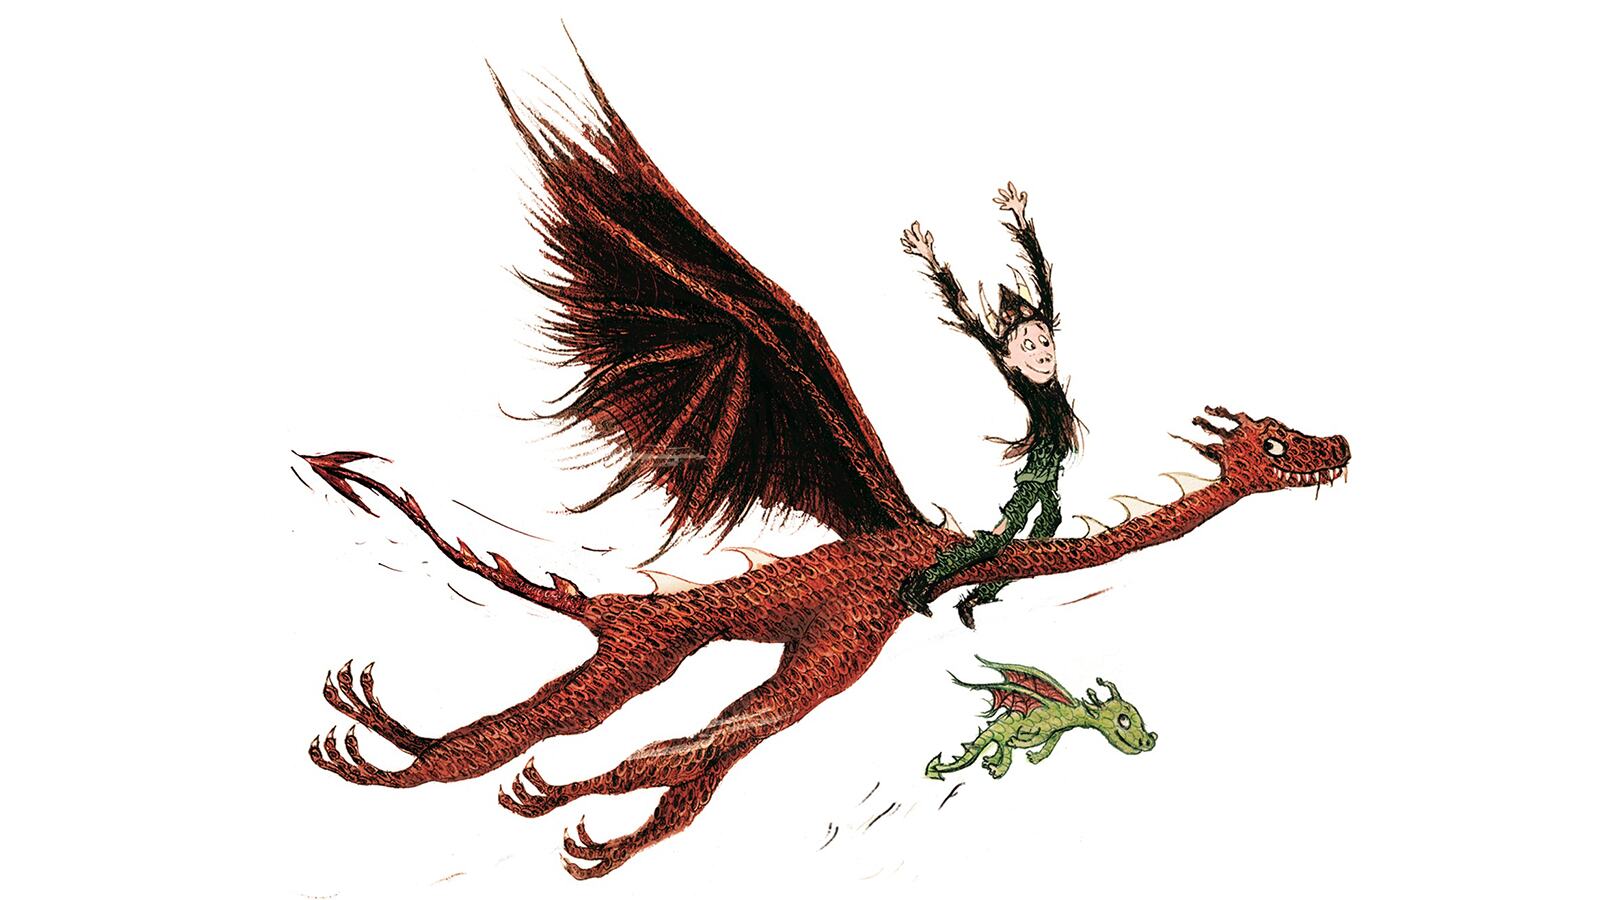 Book in a Day: How to Train Your Dragon